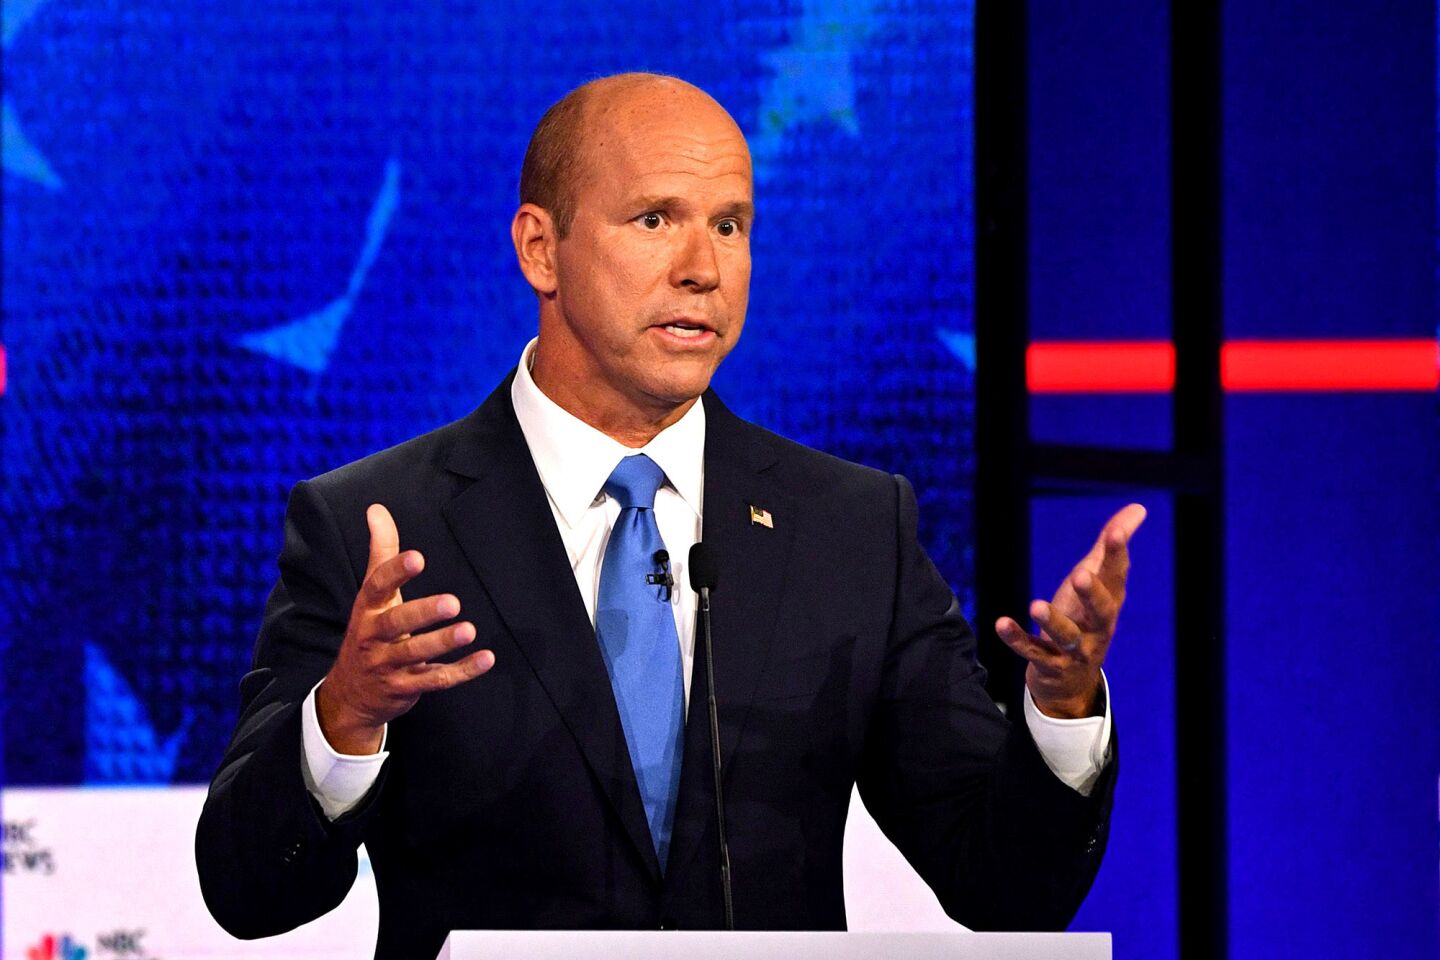 Candidate John Delaney, a former Maryland congressman positioned himself as a moderate in the field and attacked the idea of abolishing private insurance.